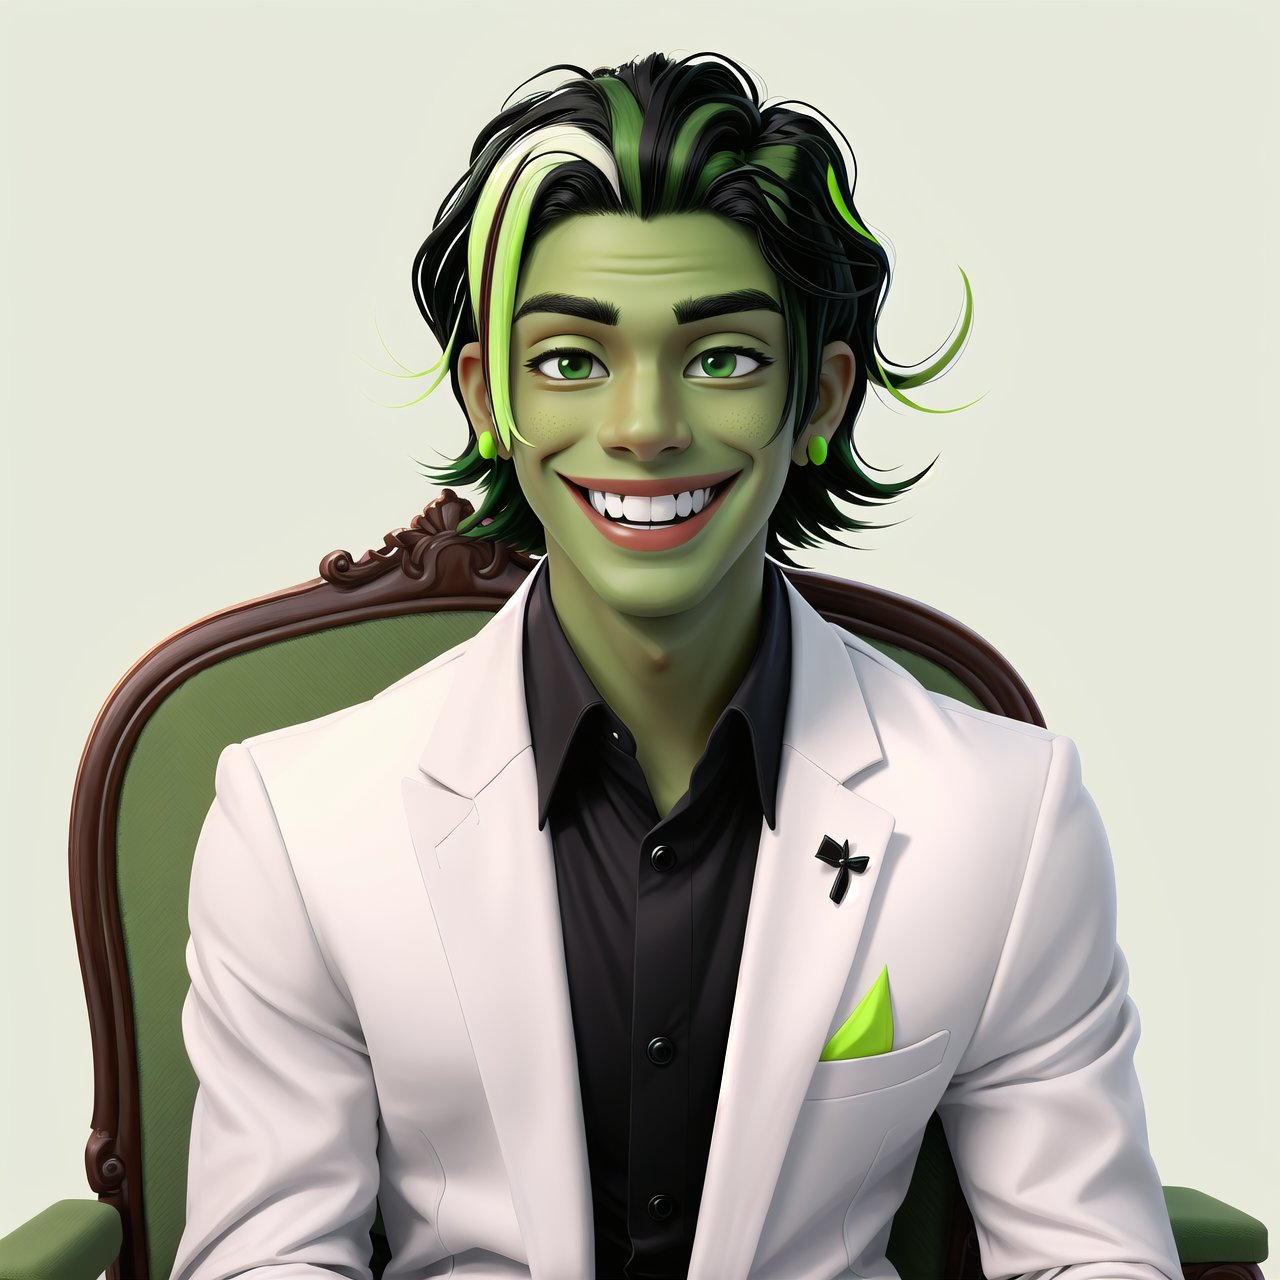 an elegant boy, with white skin, green eyes, smiling, black hair with a green streak, sitting on some chair
,in japan